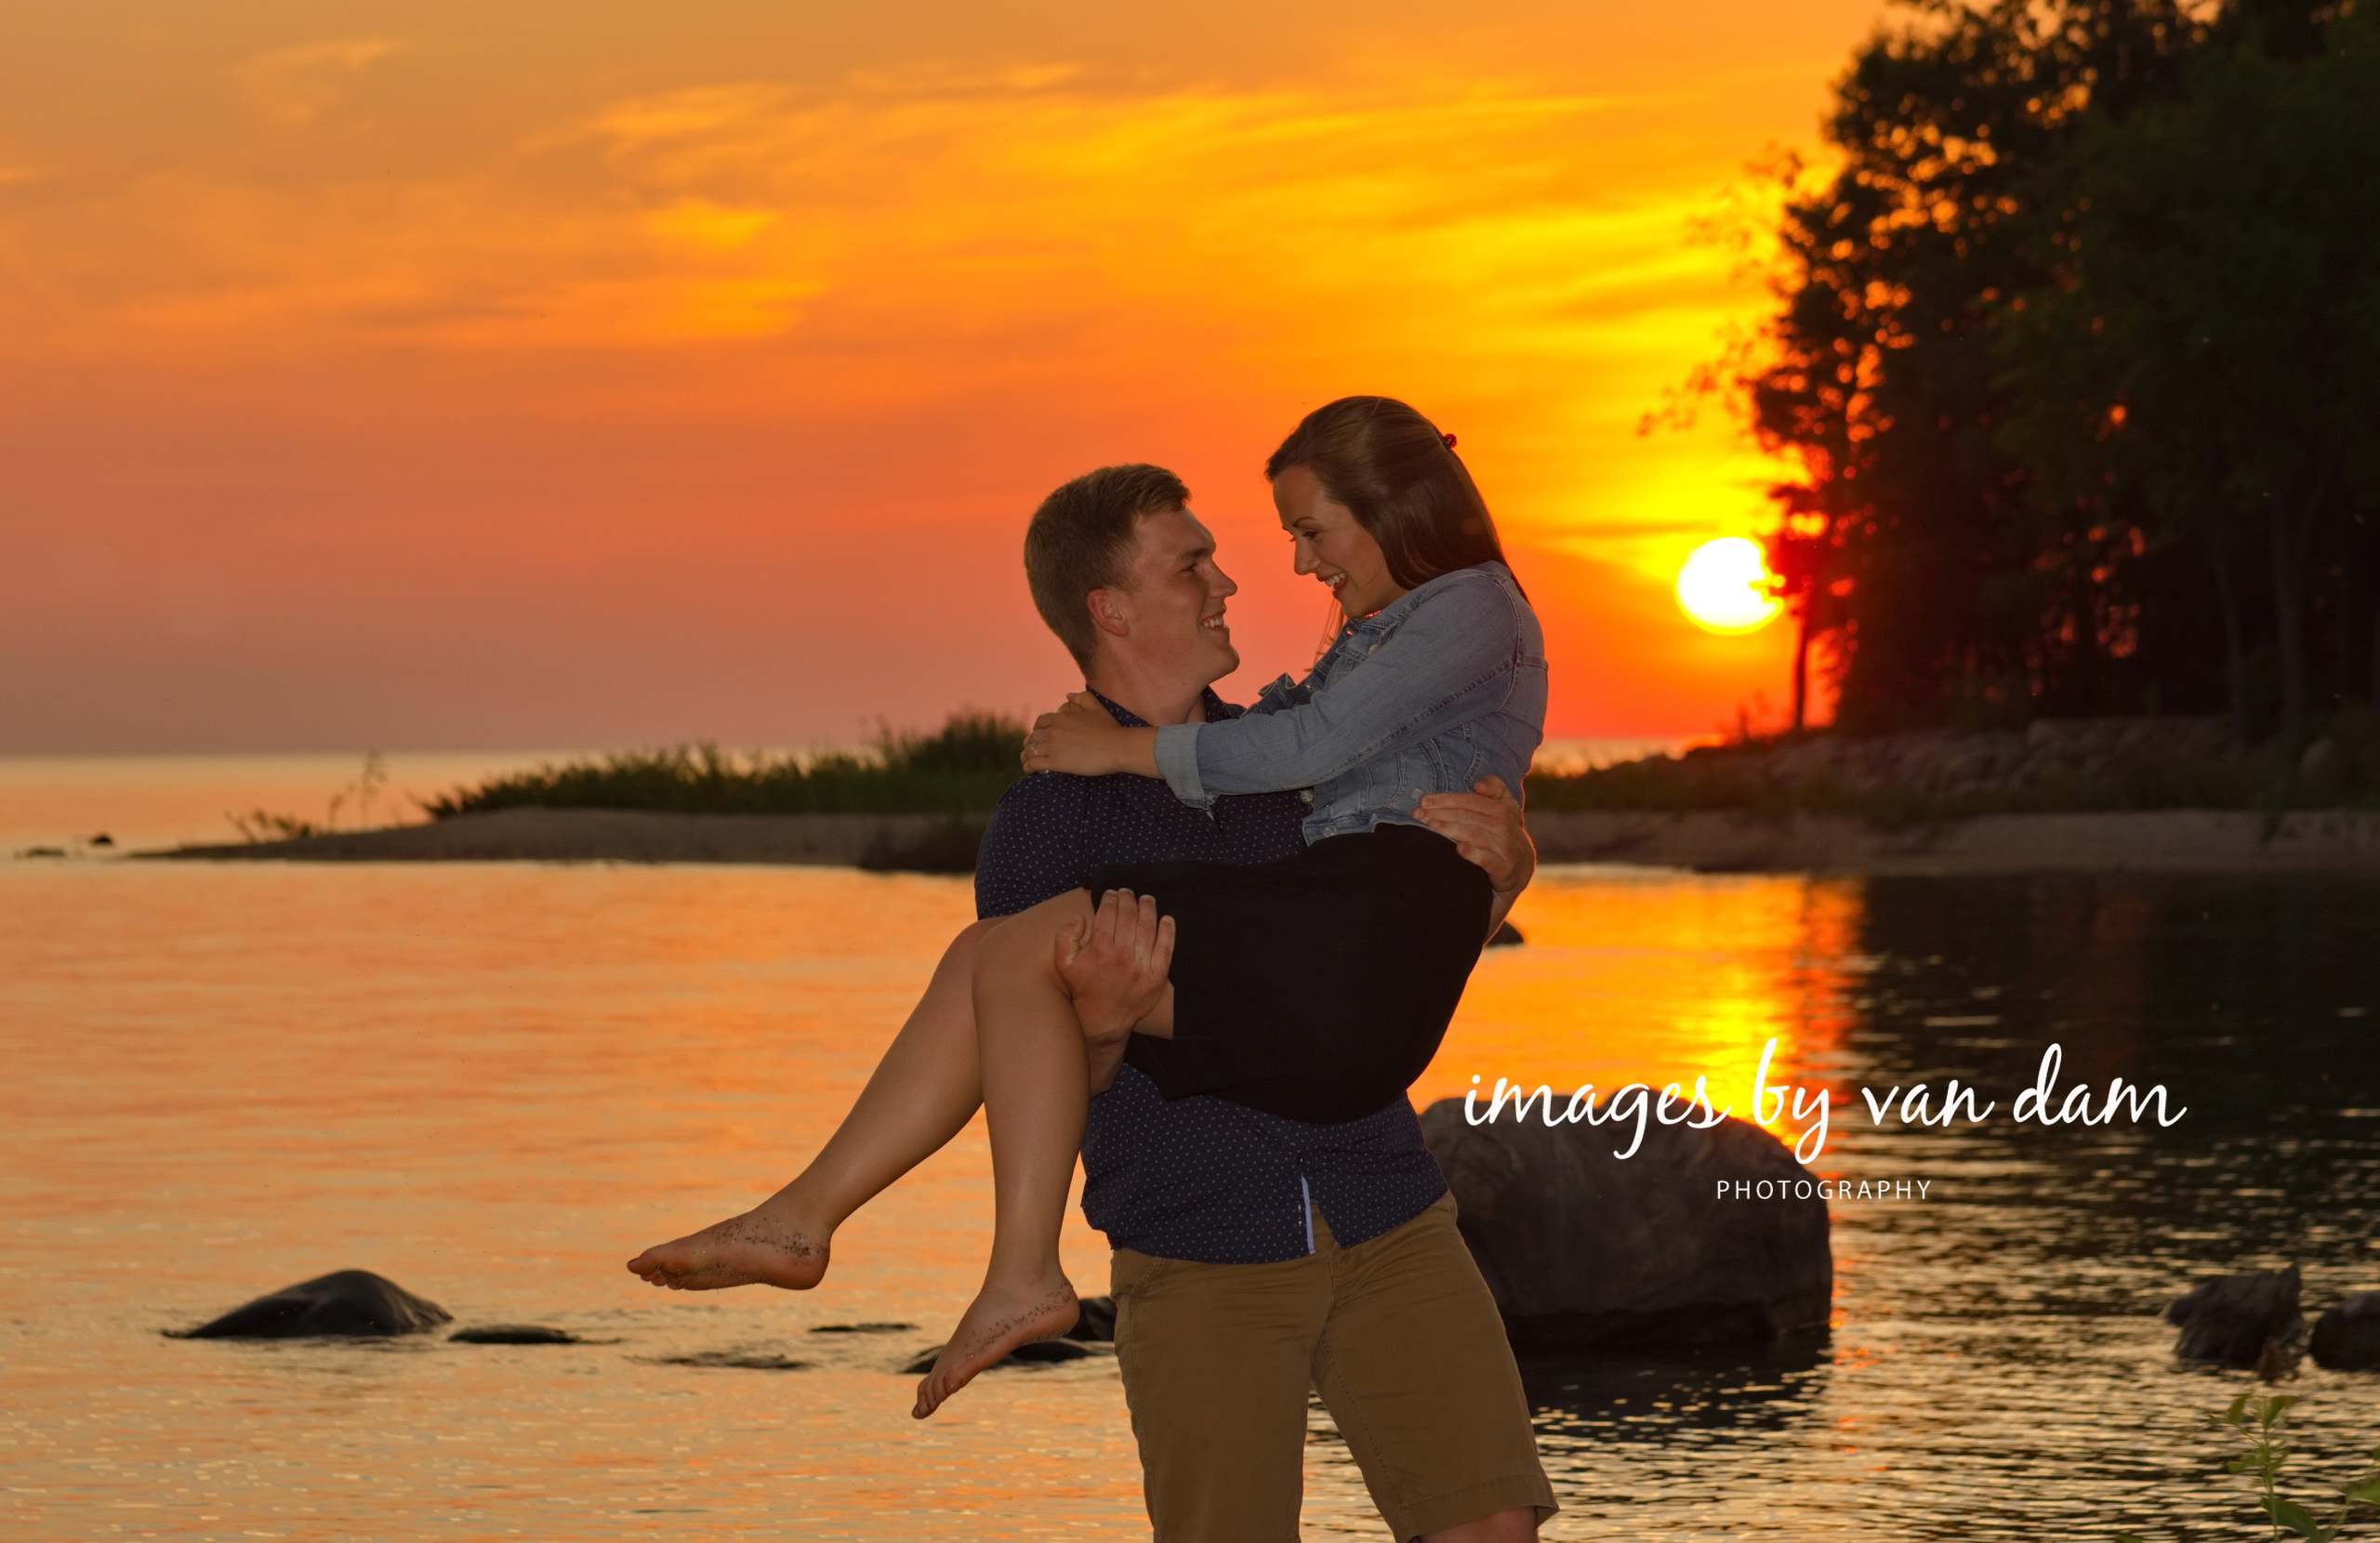 Young man lifts woman in his arm with dramatic sunset behind